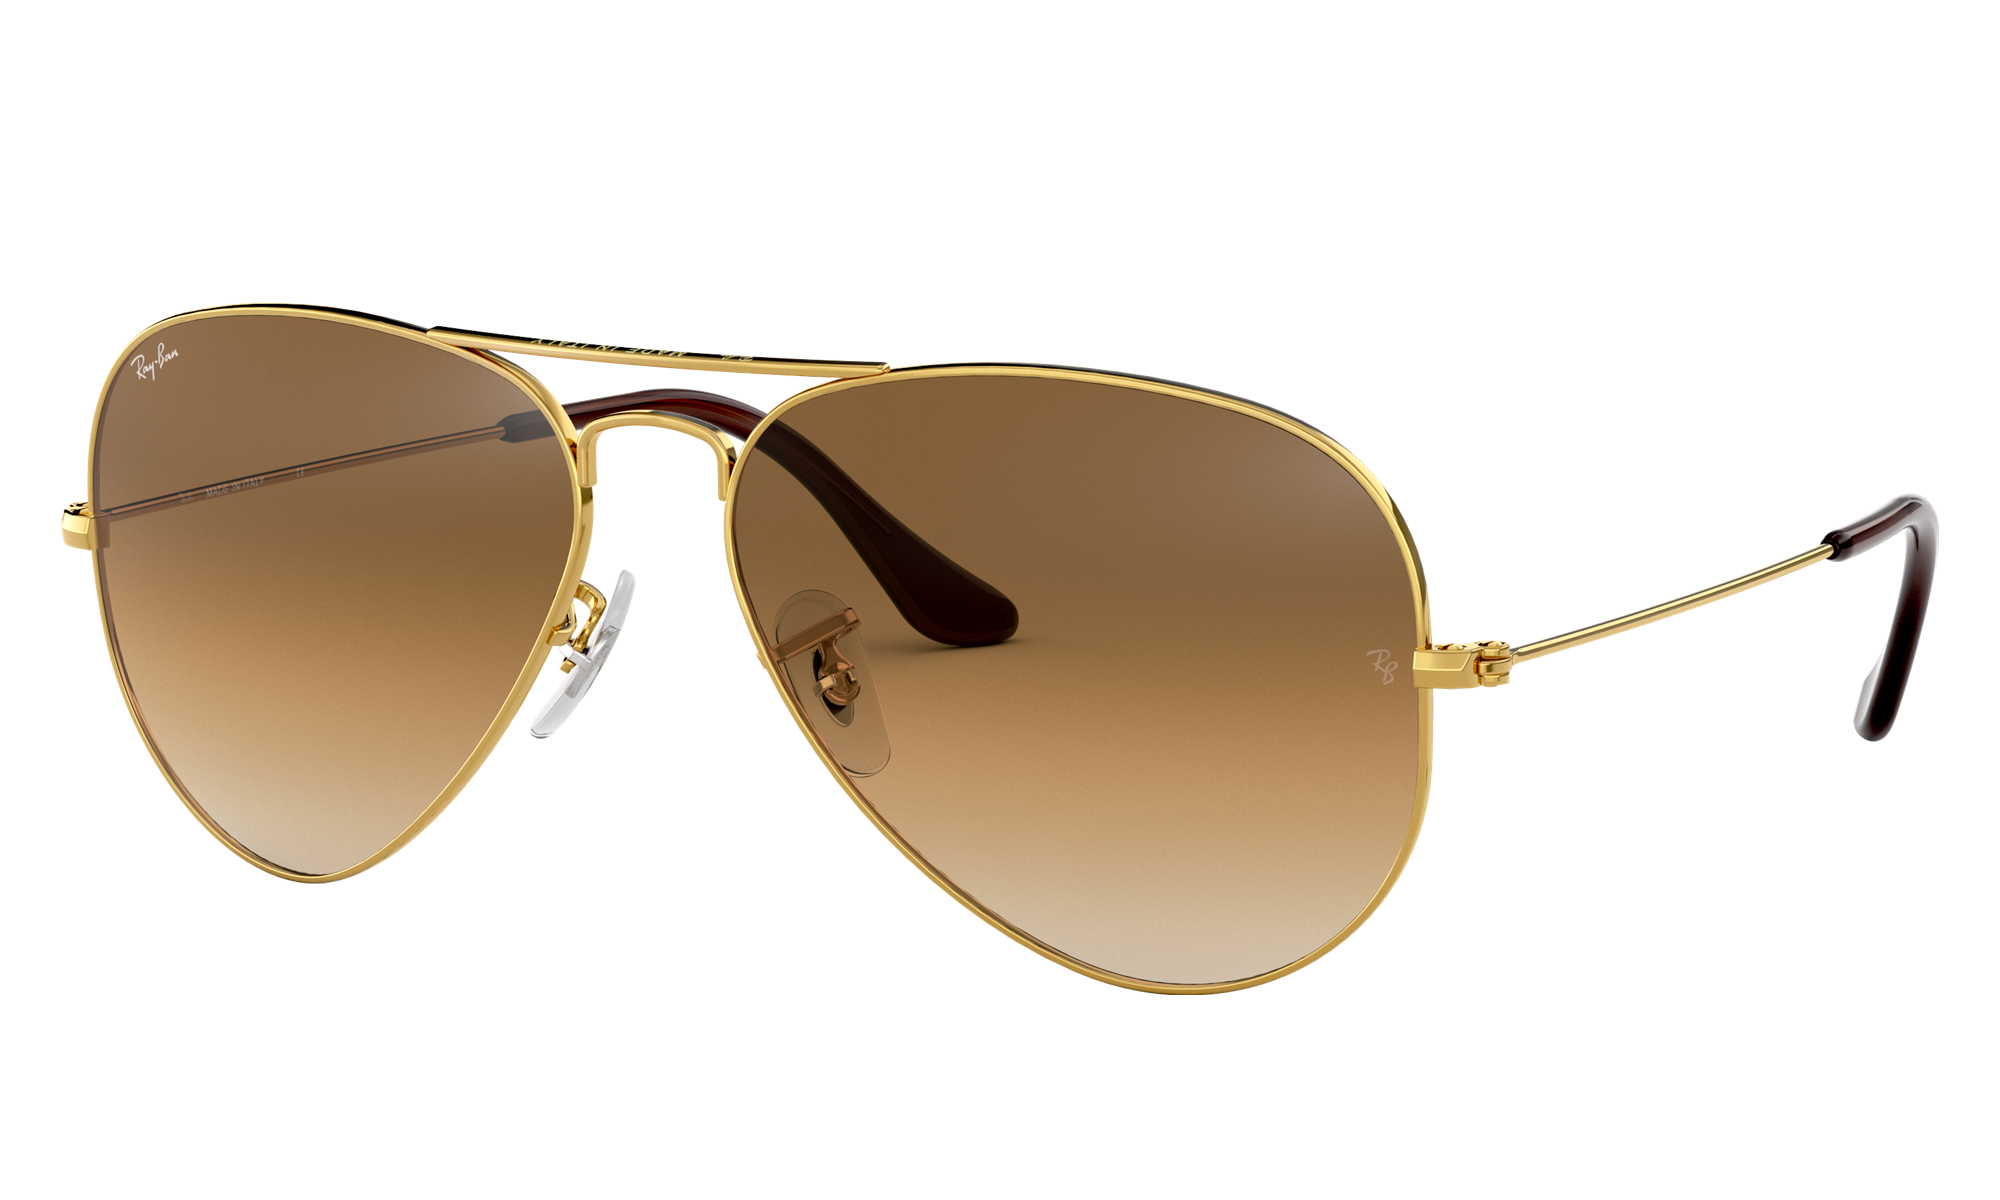 Ray-Ban Unisex Rb3025 Gold Size: Large